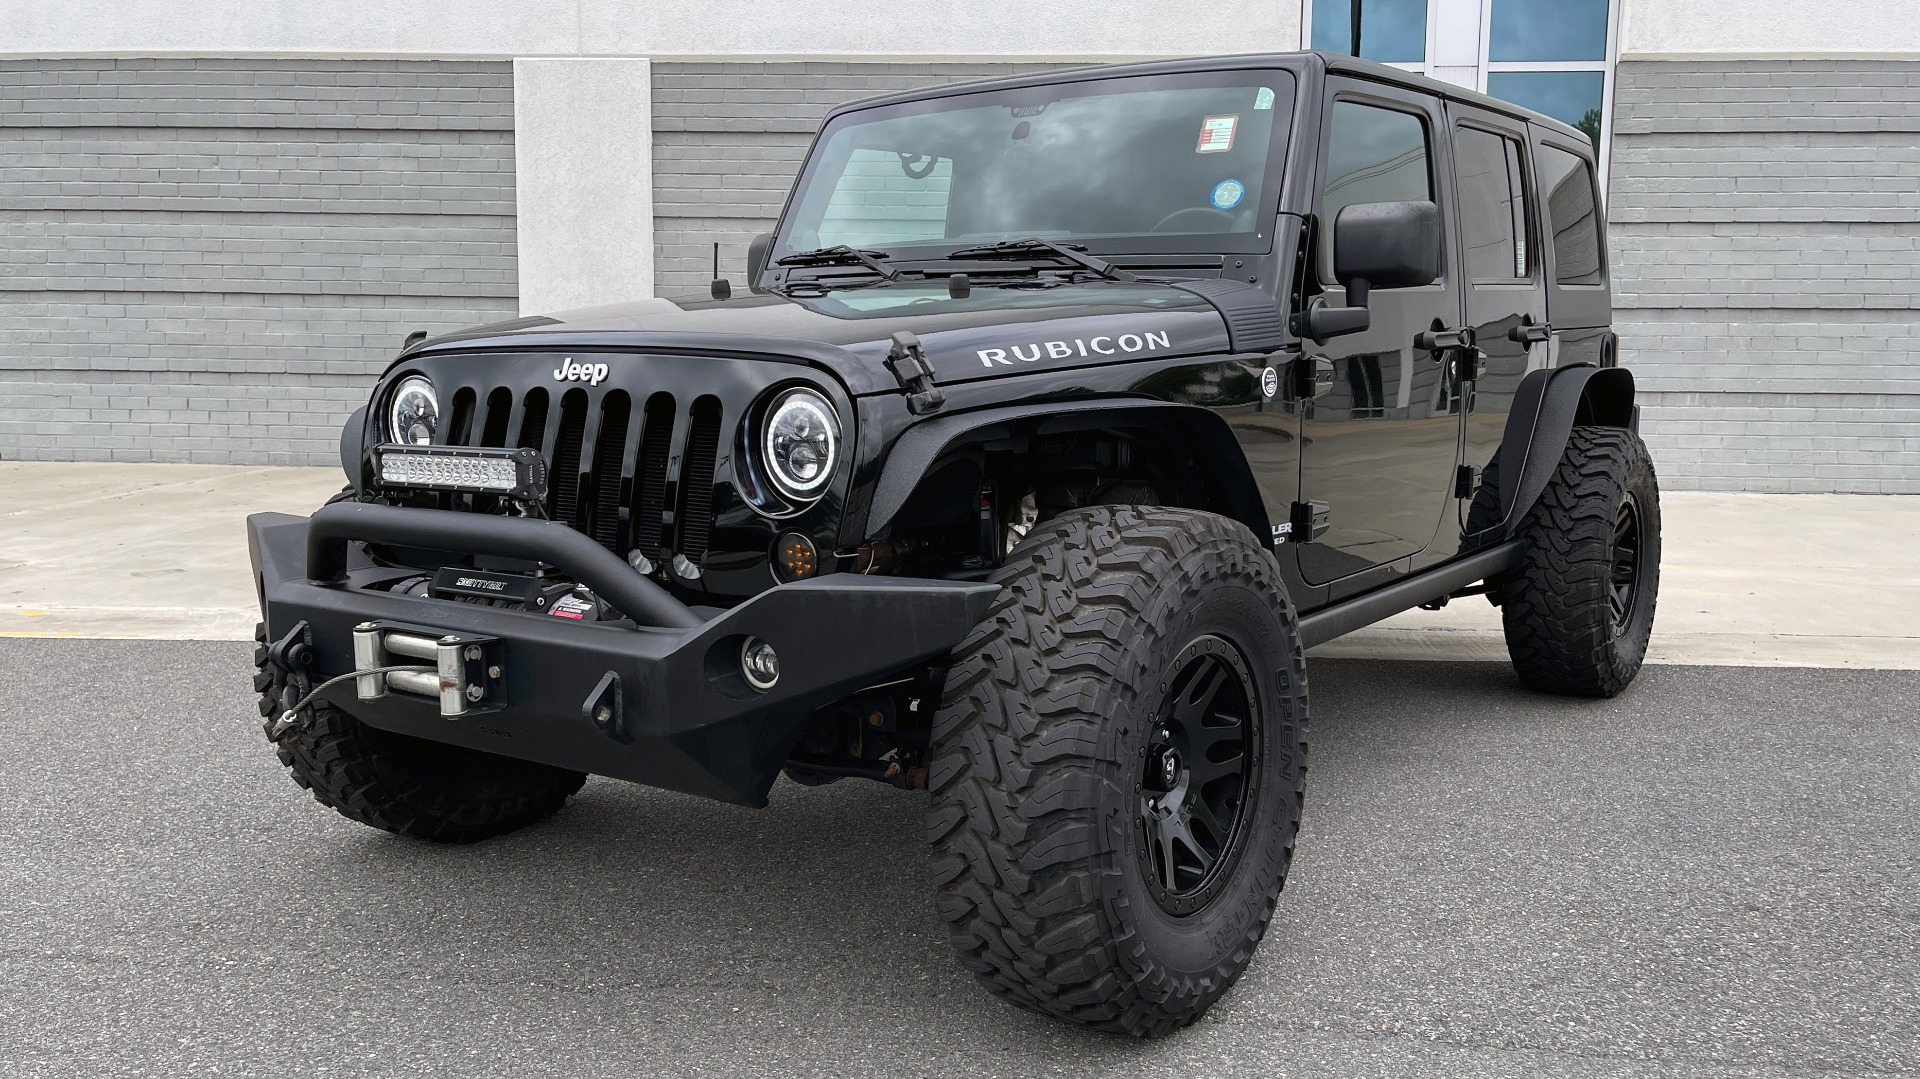 Used 2013 Jeep WRANGLER UNLIMITED RUBICON 4X4 / 3.6L V6 / 6-SPD MAN / DUAL-TOP / AIR COND for sale Sold at Formula Imports in Charlotte NC 28227 3